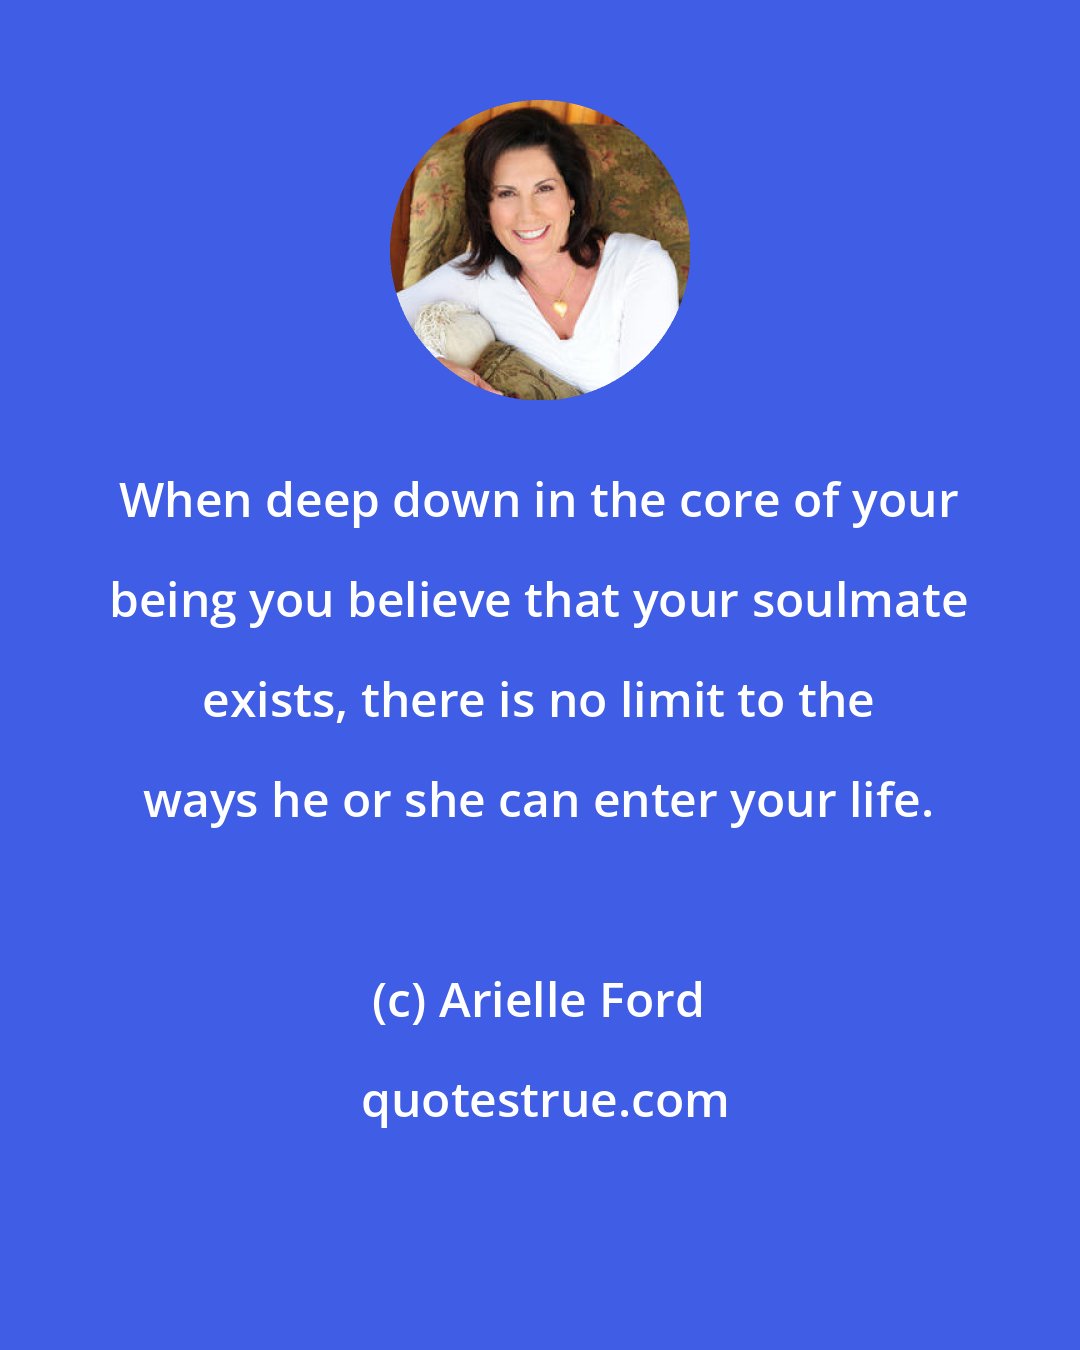 Arielle Ford: When deep down in the core of your being you believe that your soulmate exists, there is no limit to the ways he or she can enter your life.